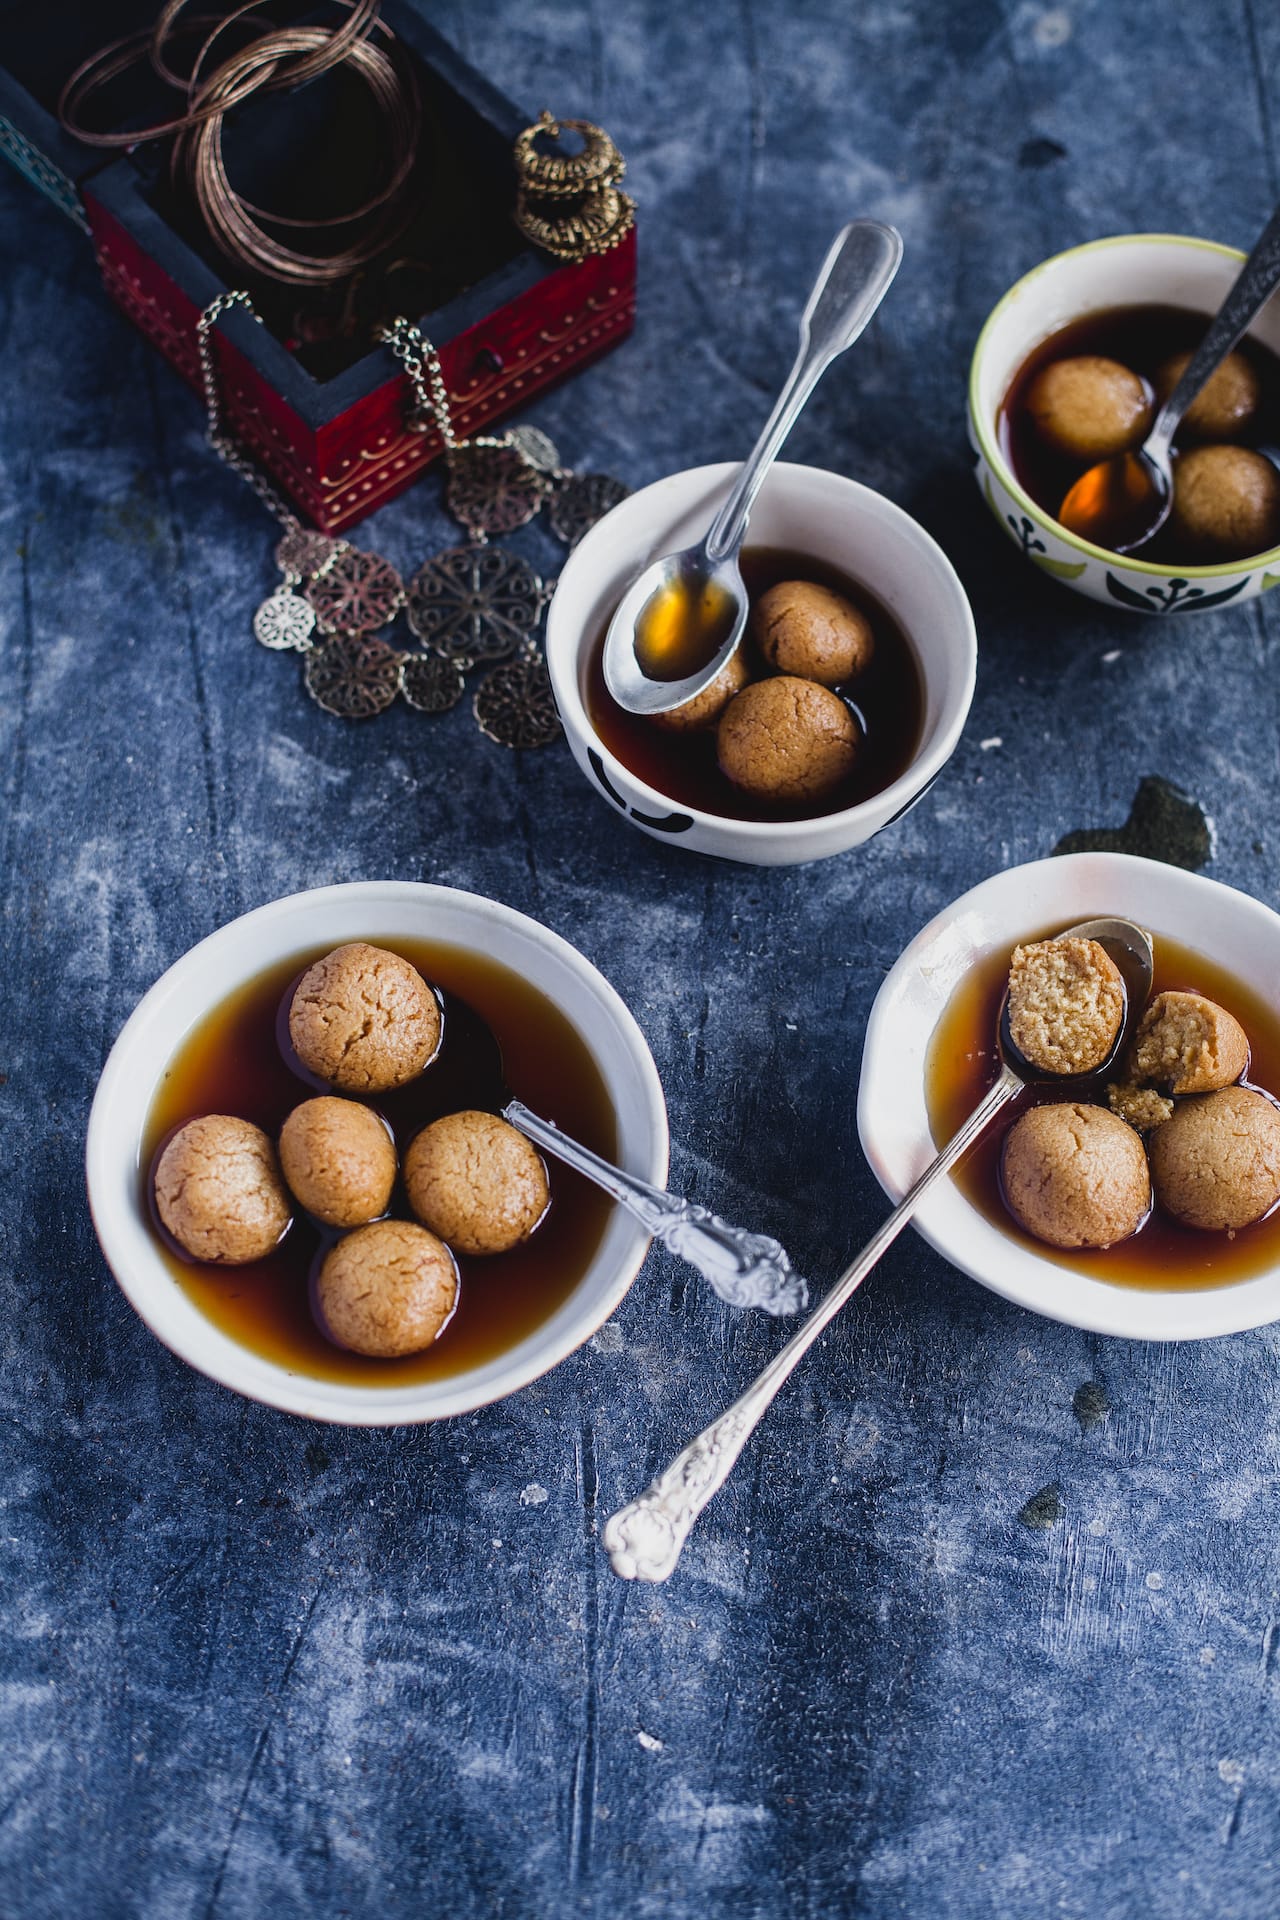 Nolen Gur Rasgulla (Cheese Balls cooked in Jaggery Syrup) - Playful Cooking